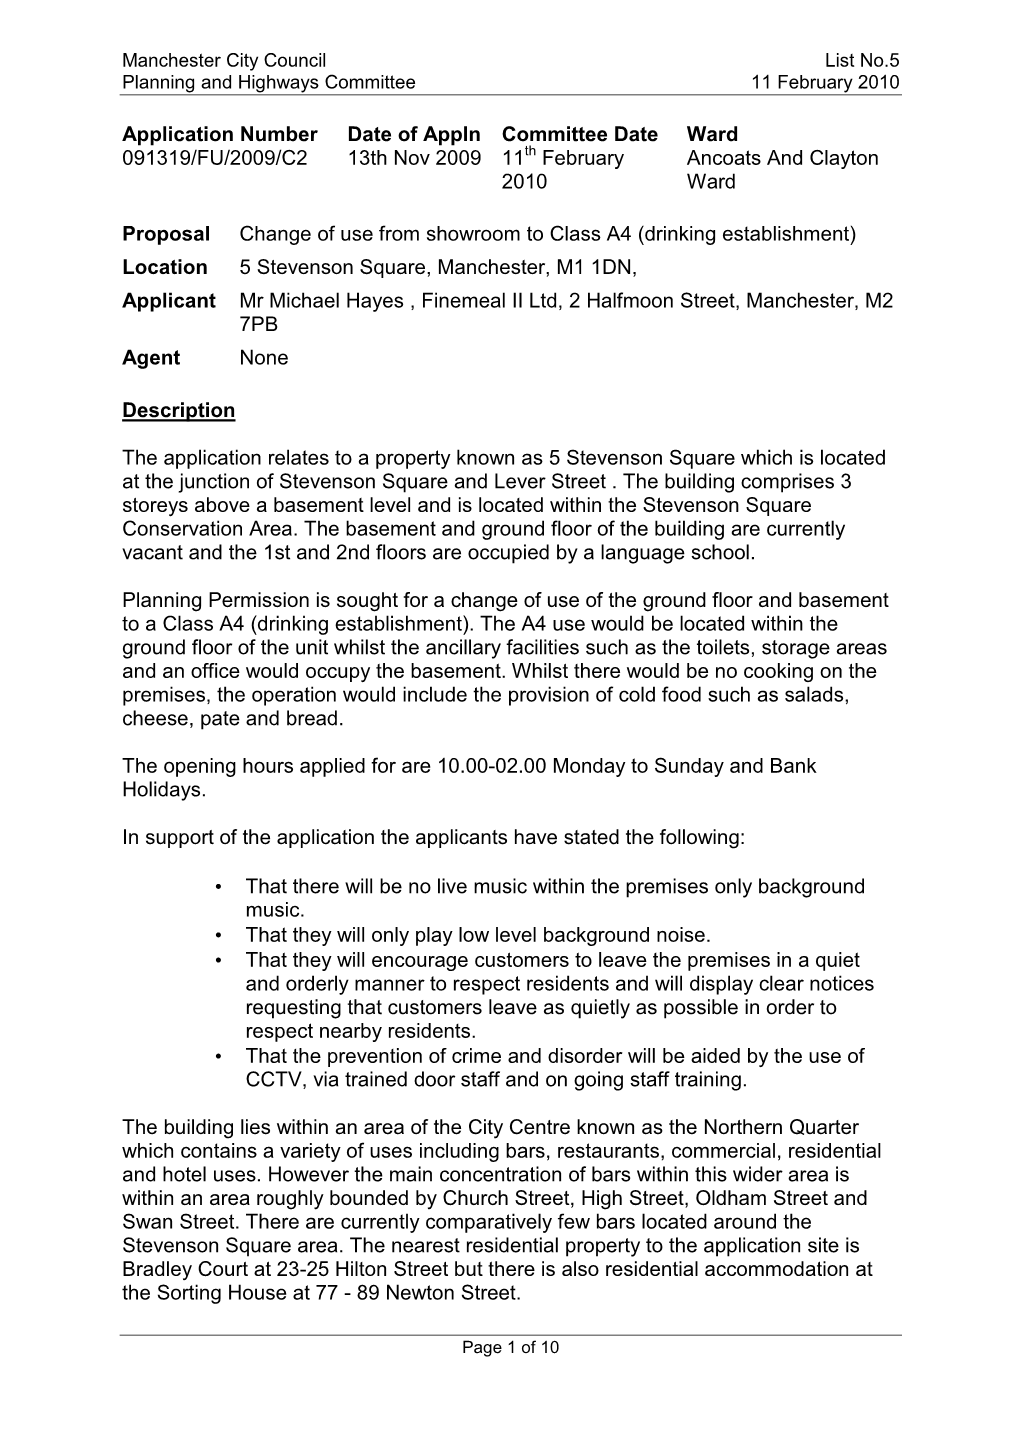 Report to Planning and Highways Committee 11 February 2010, LIST